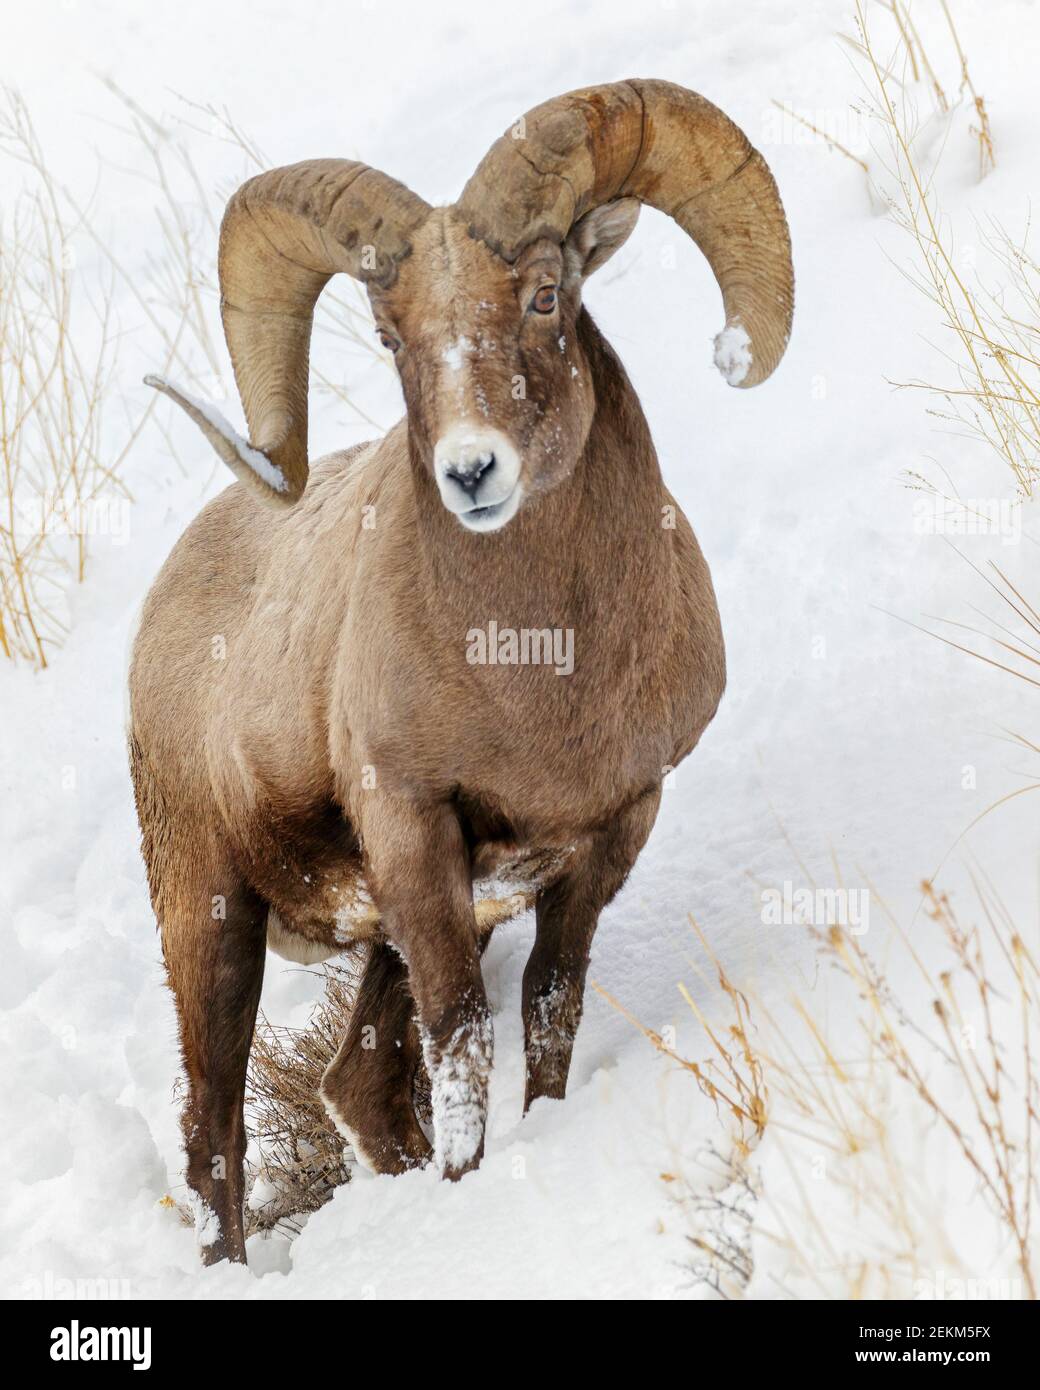 Parco Nazionale di Yellowstone, Wyoming: Bighorn RAM (Ovis canadensis) in inverno Foto Stock